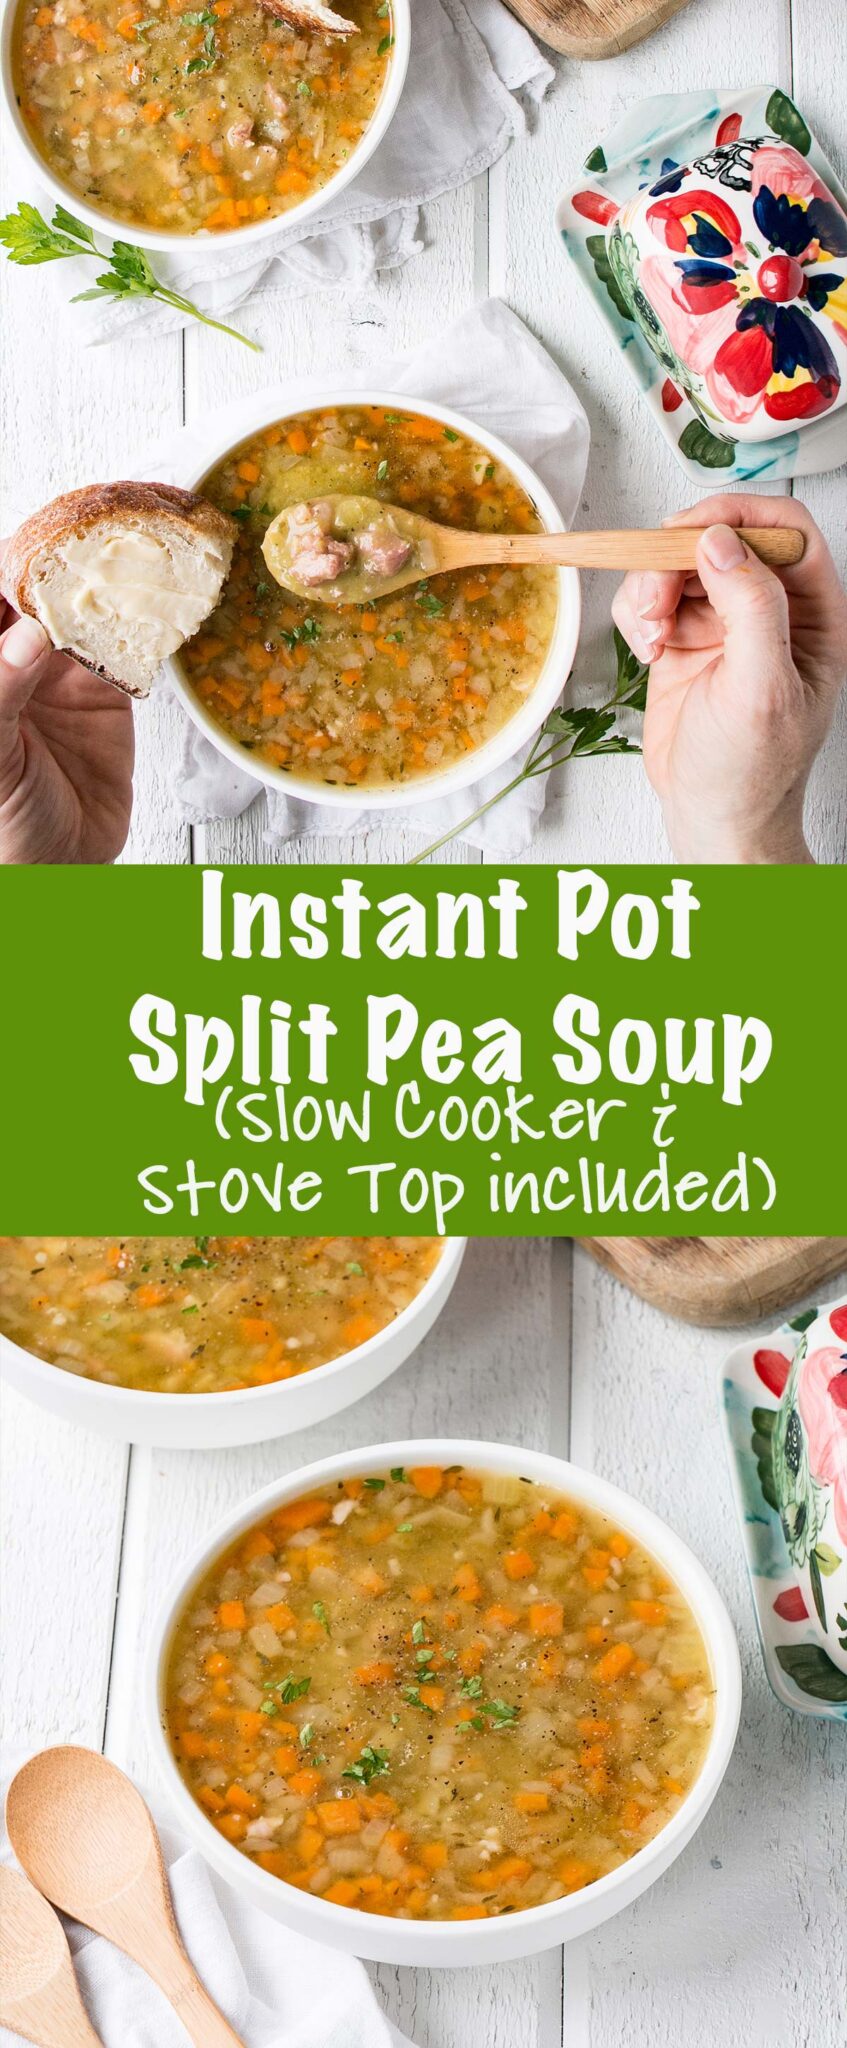 Instant Pot Split Pea and Ham Soup is made in under 35 minutes and is filled with vegetables and healthy split peas.  via @mykitchenlove